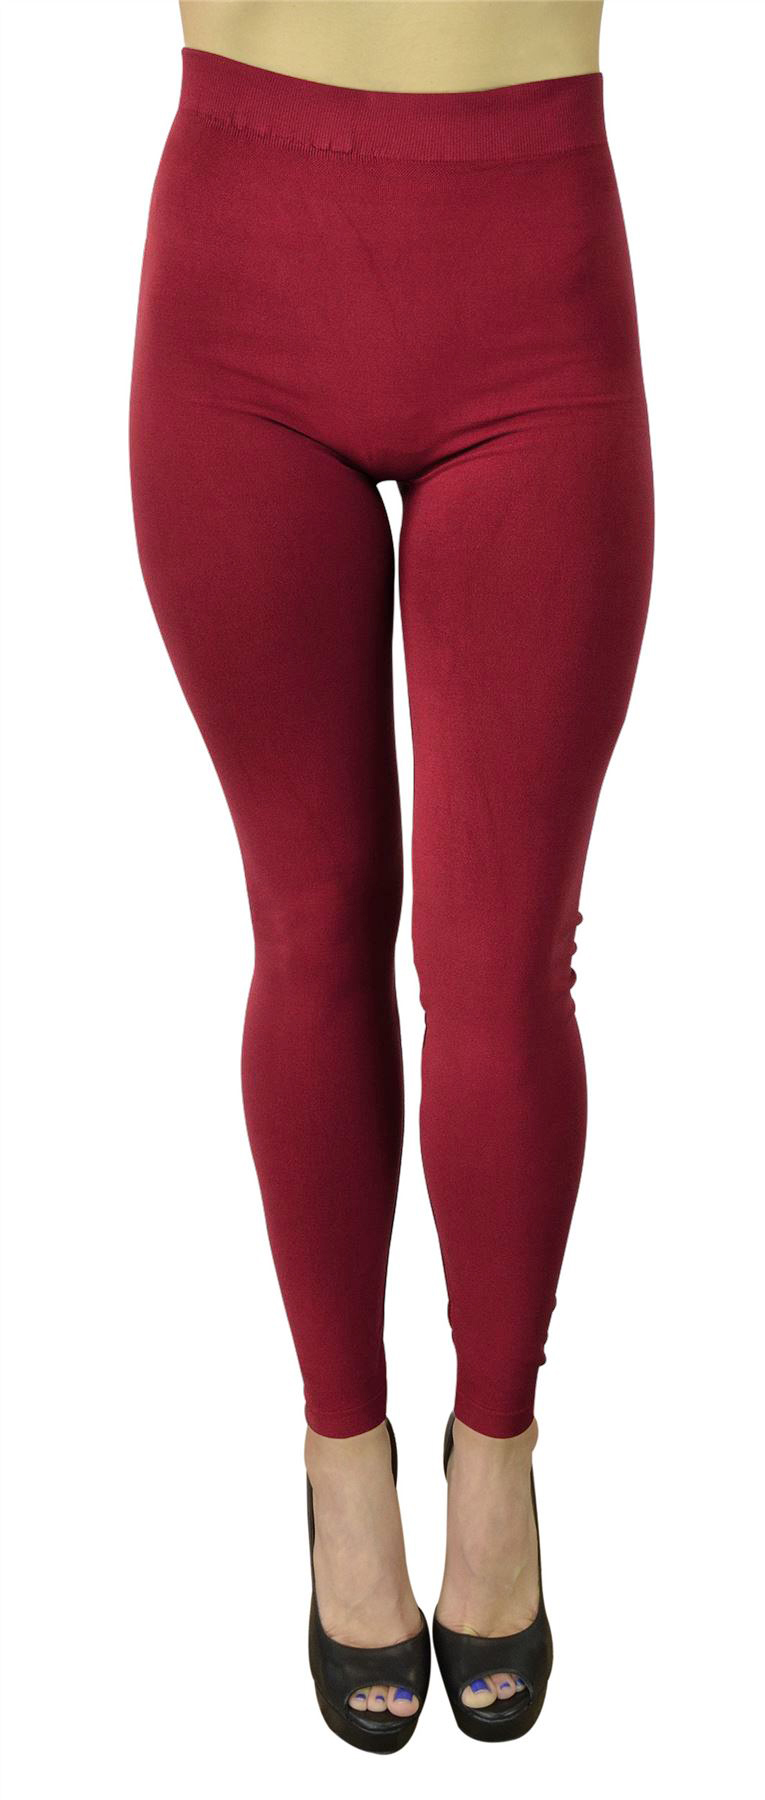 Belle Donne High Waist Leggings Tights for Women Fashion Gym Yoga Casual Trendy Colors - Burgundy-5 in-Waistband